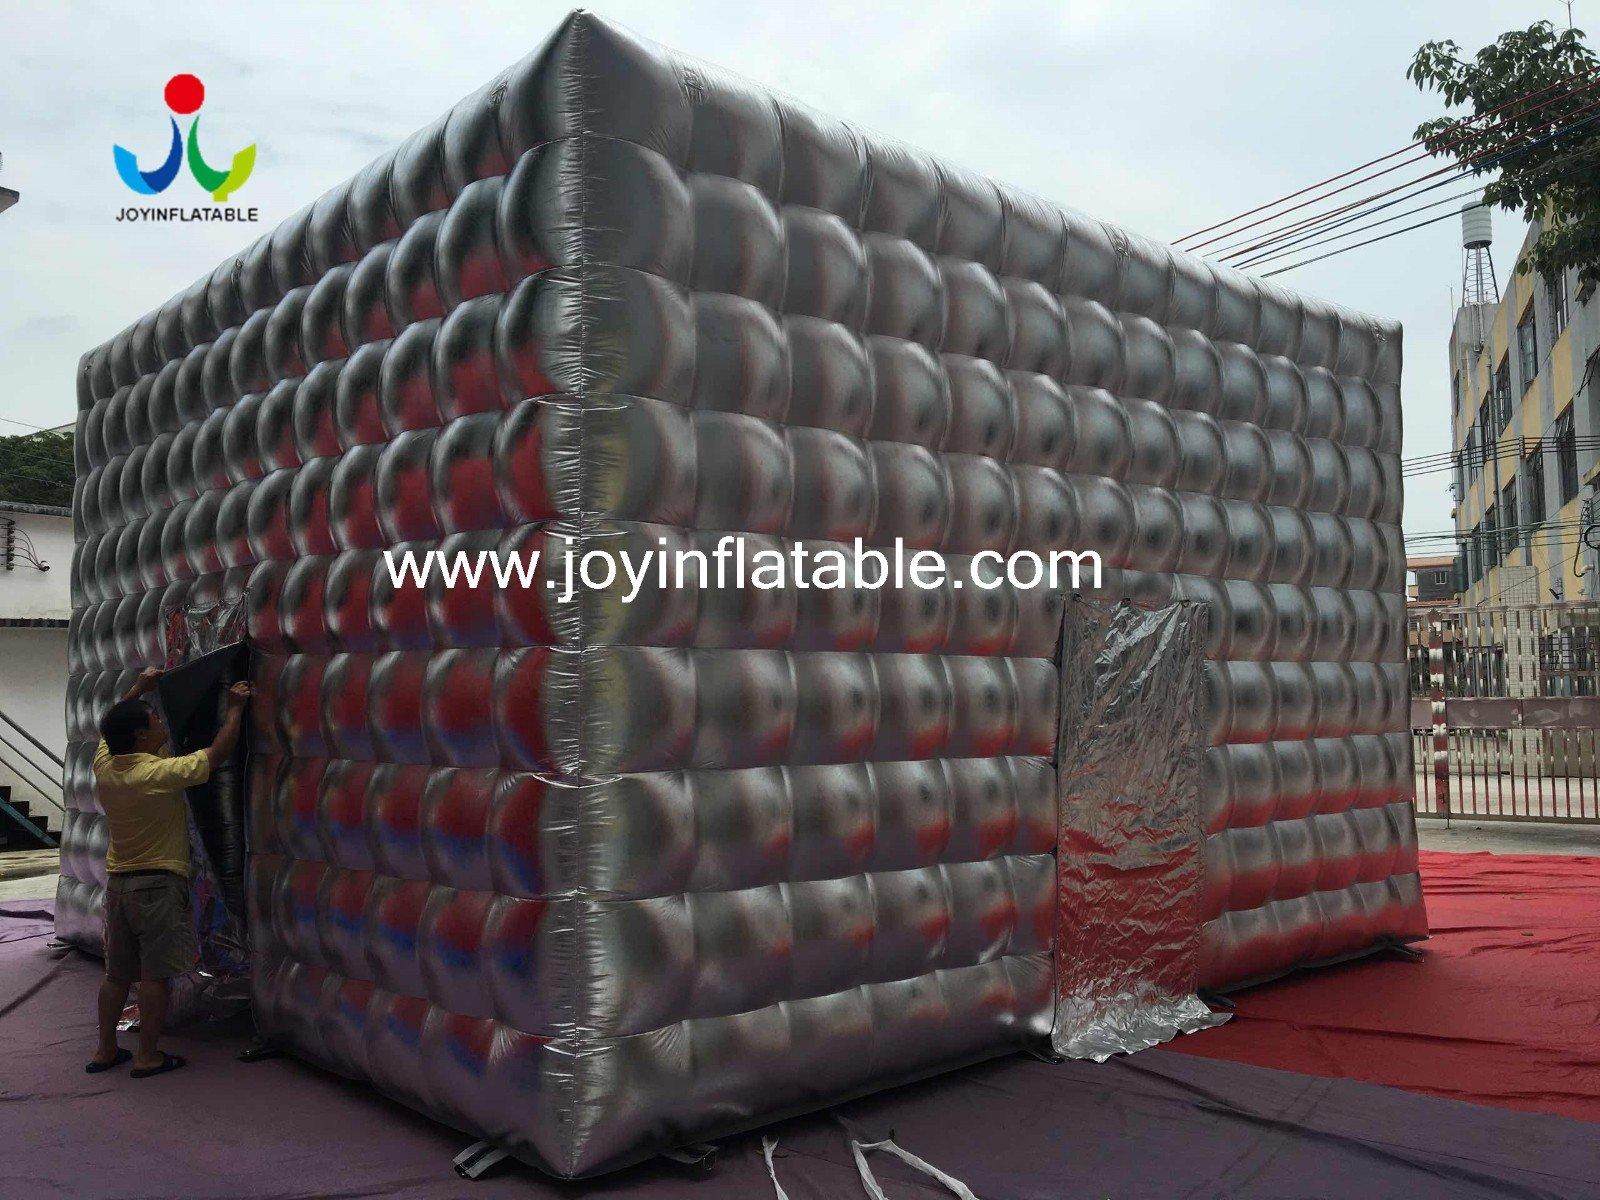 games inflatable marquee tent supplier for child